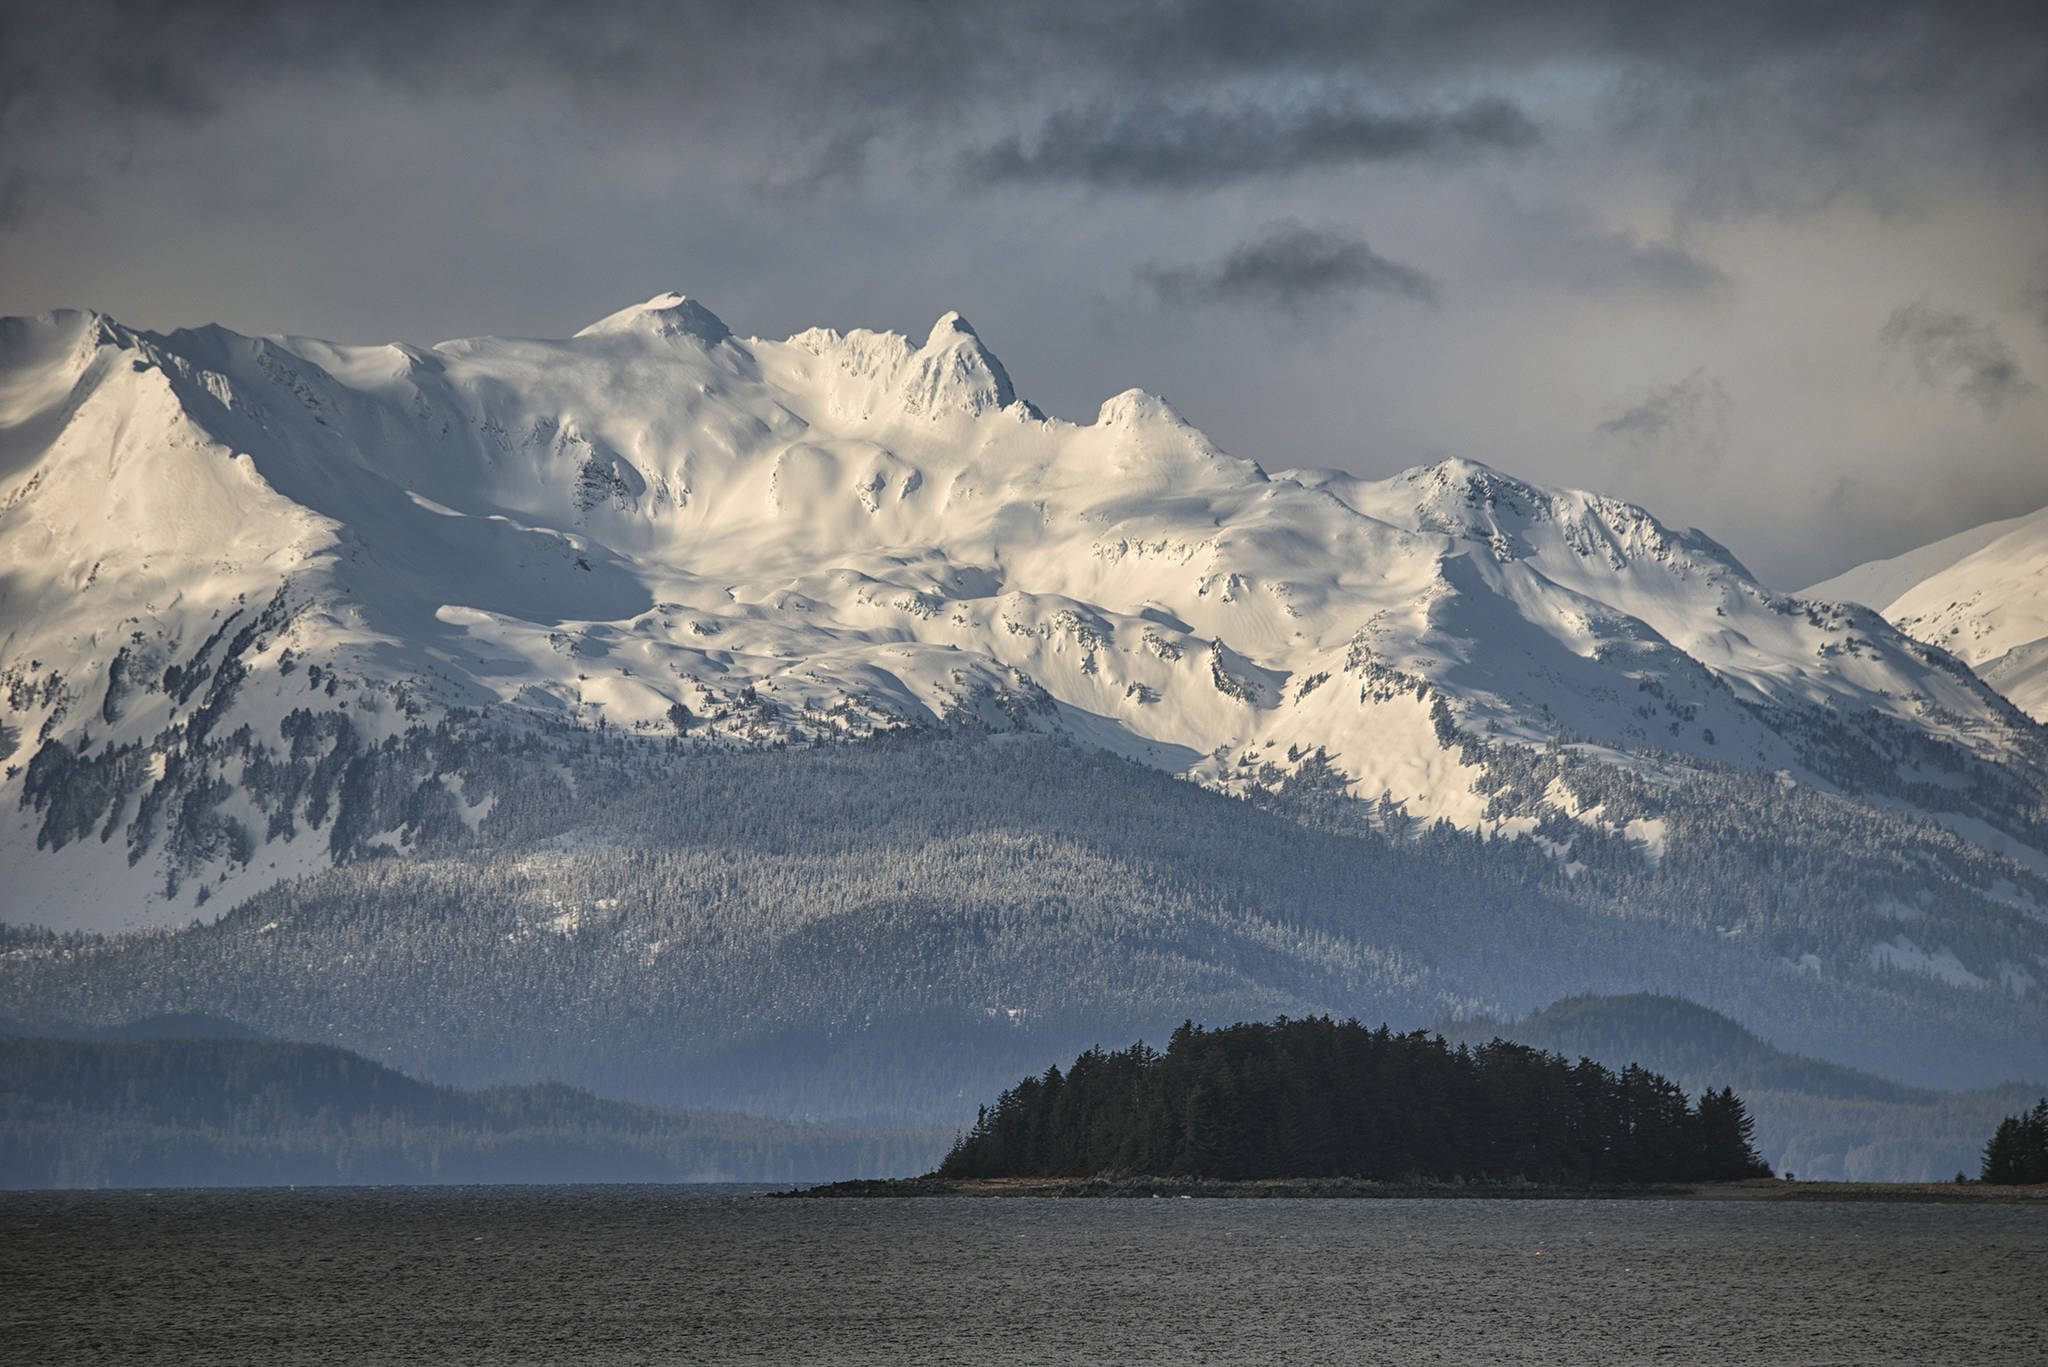 The Chilkat Mountains tower above William Henry Bay in this Friday, Feb. 26 photo. (Courtesy Photo / Kenneth Gill, gillfoto)